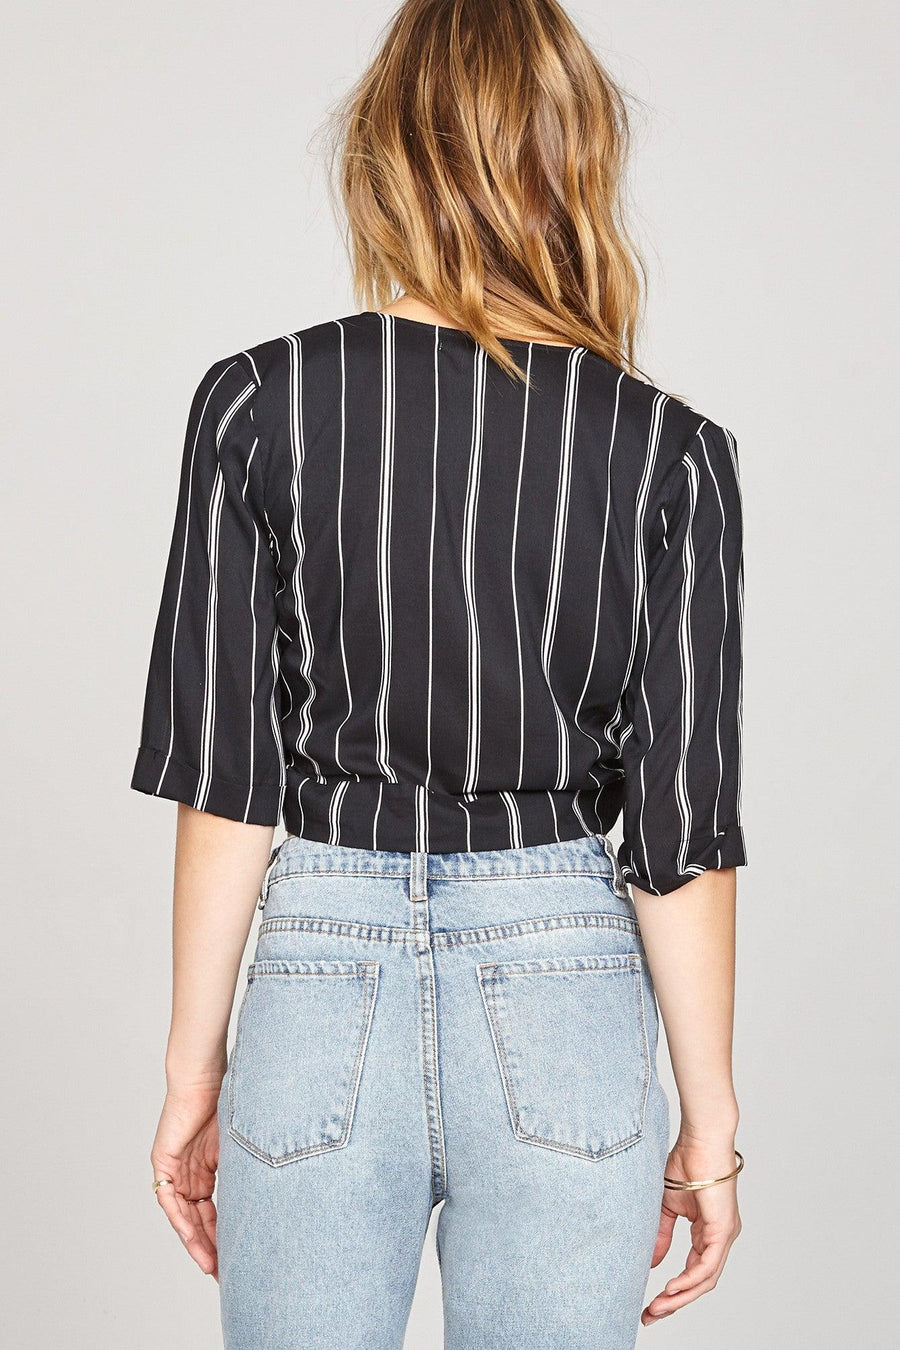 Cantina Woven Top by Amuse Society - FINAL SALE - SHOPLUNAB